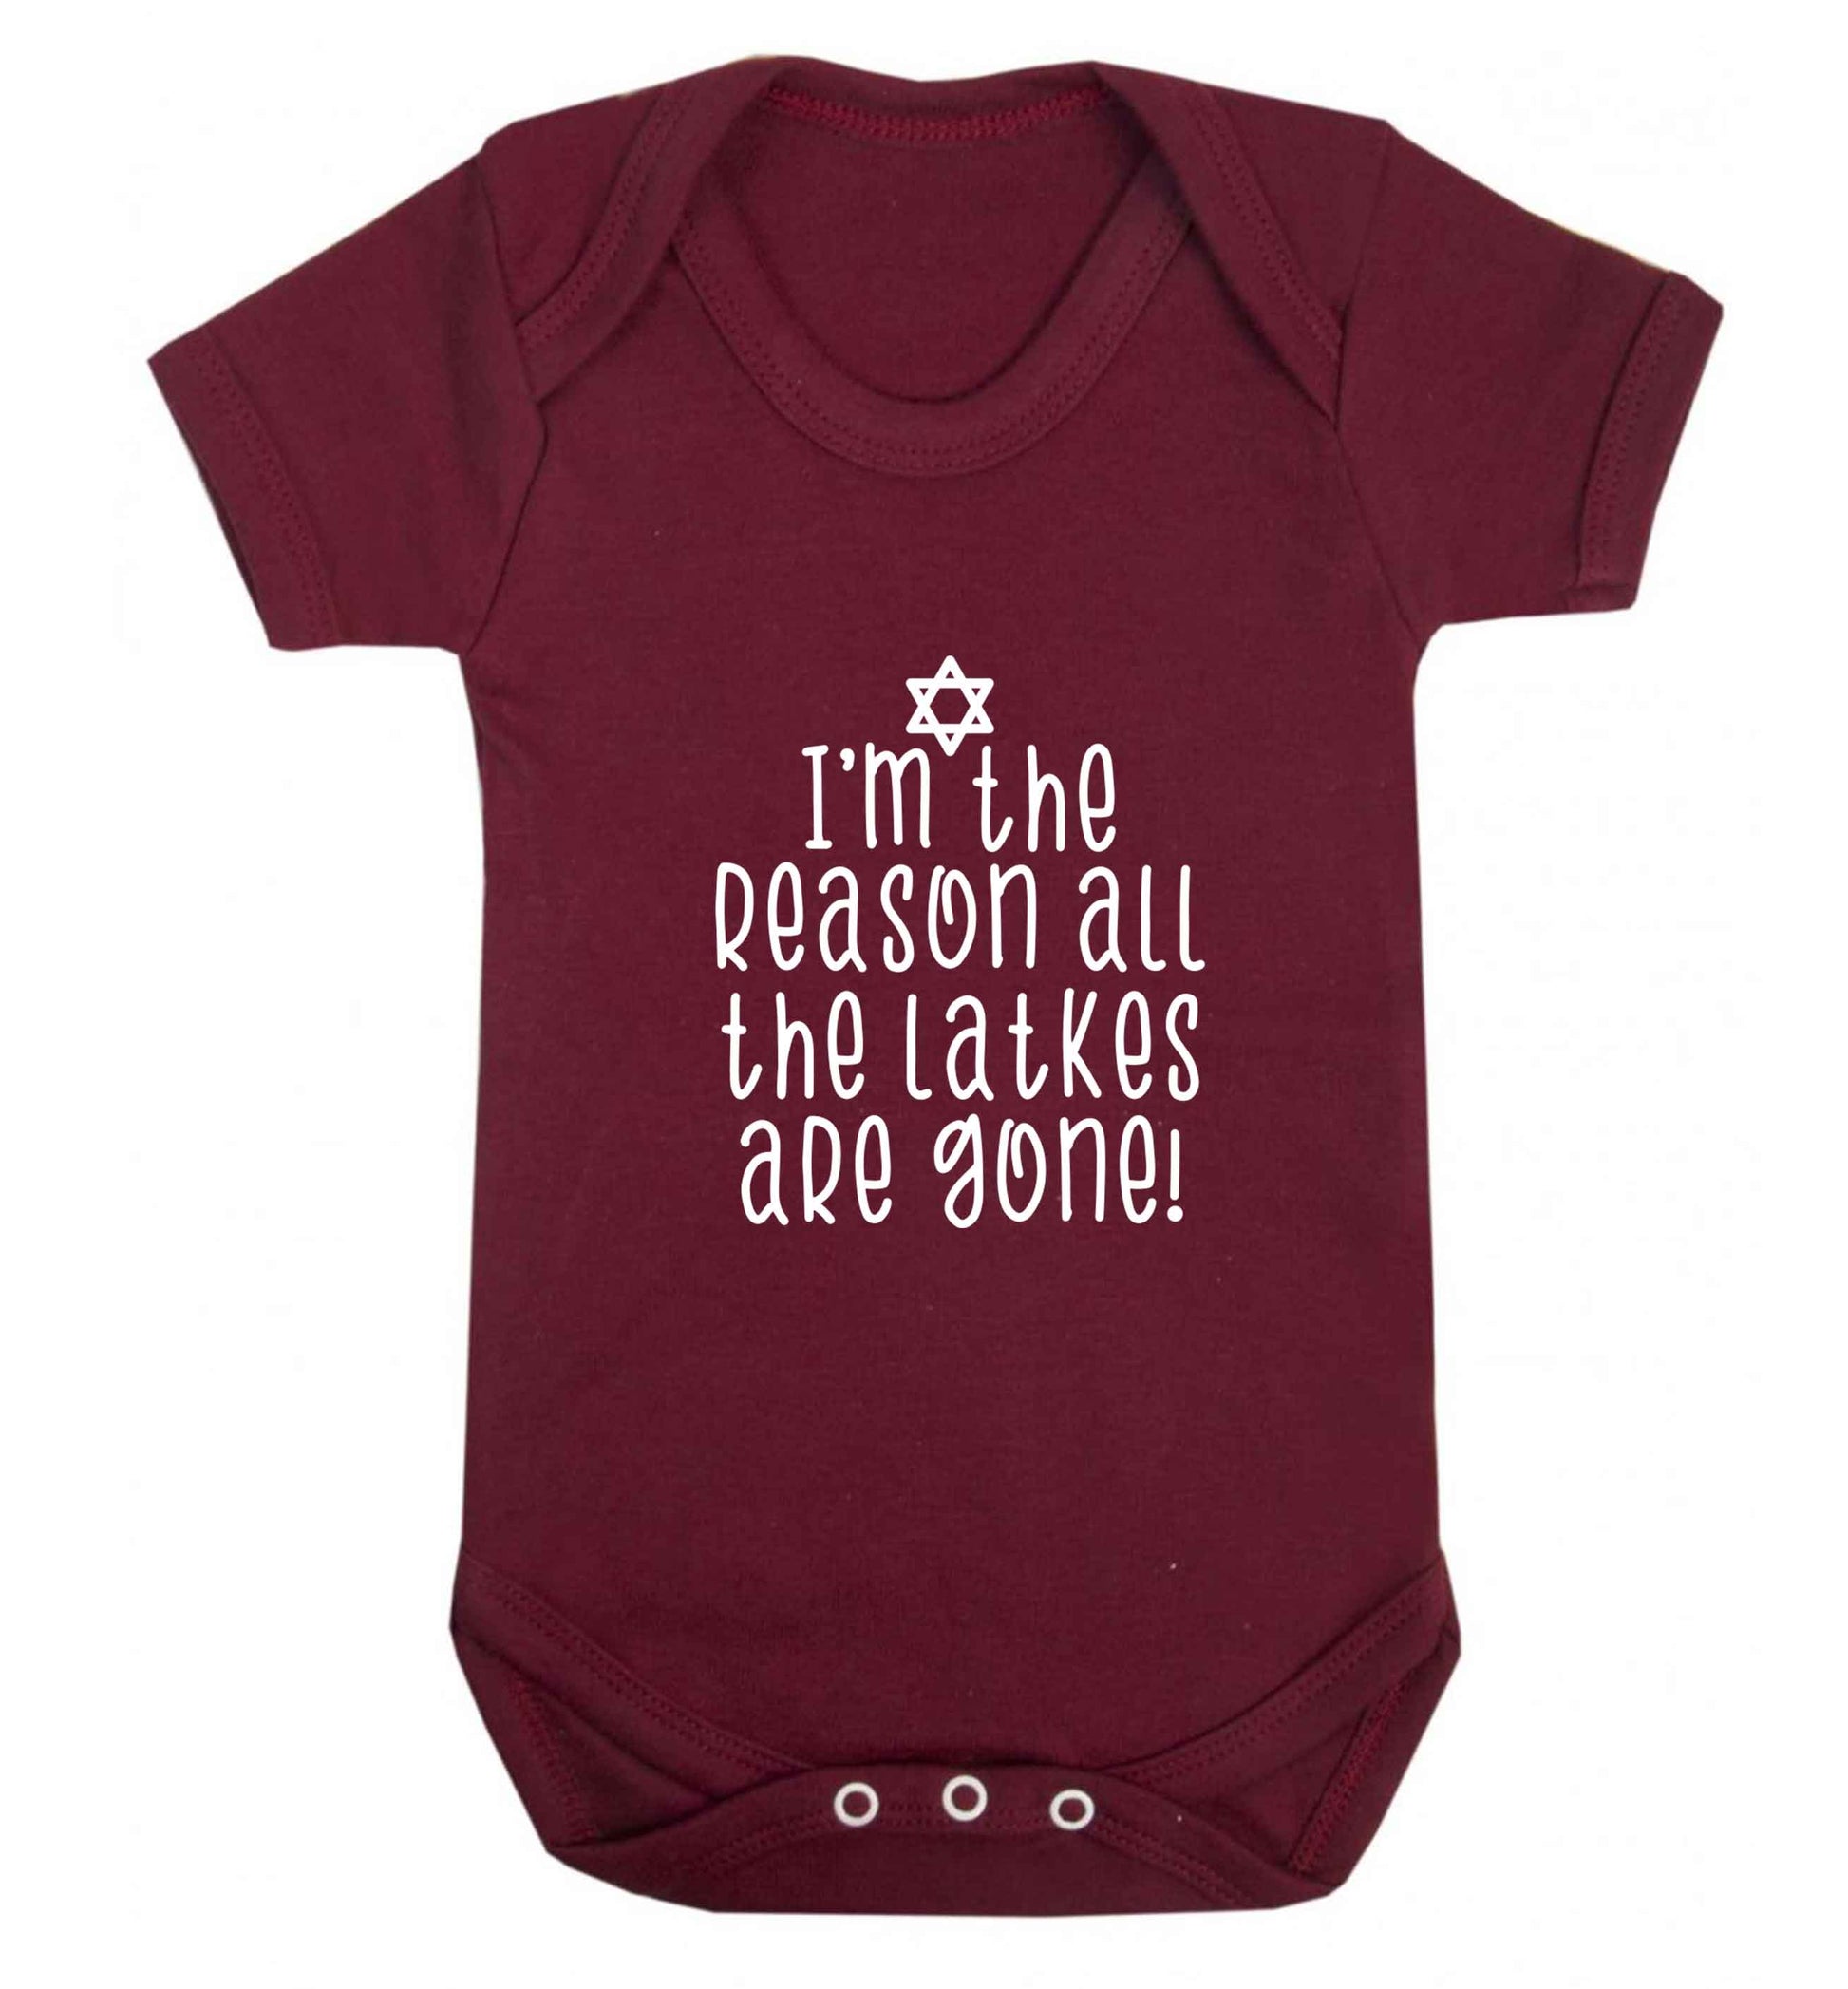 I'm the reason all the latkes are gone baby vest maroon 18-24 months